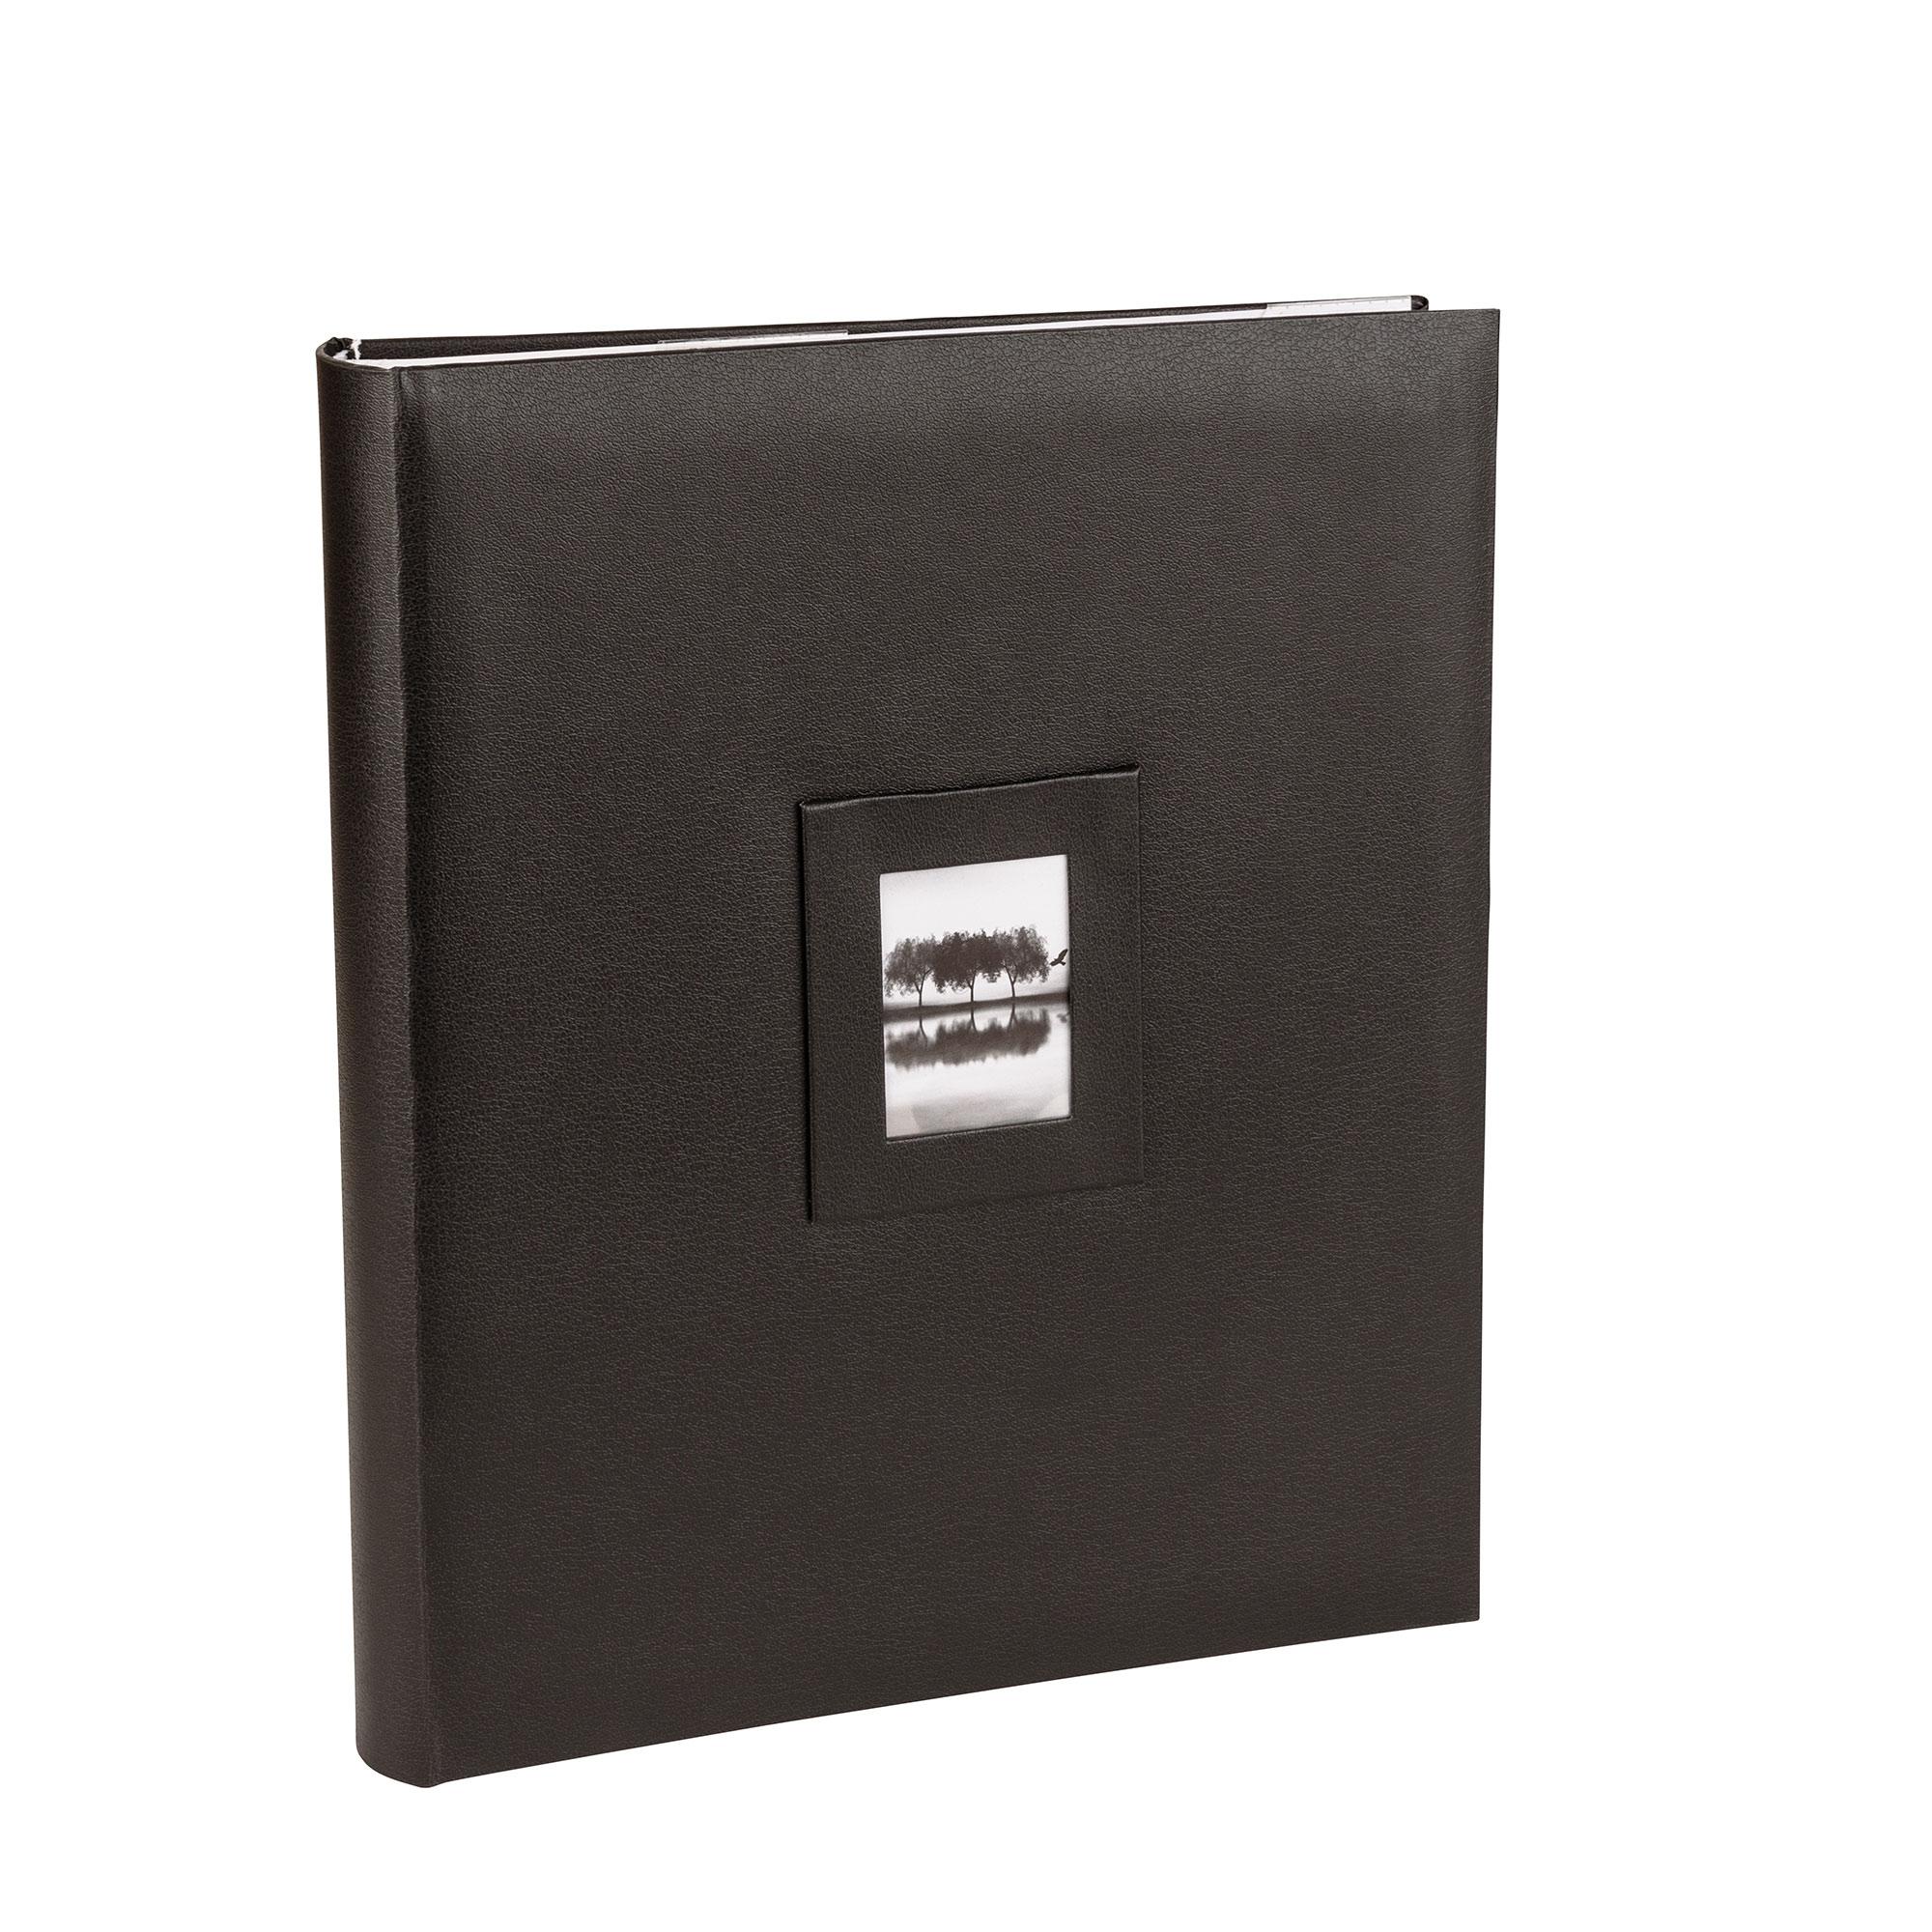 Savoy Slip-in Photo Album holds 300 APS with Memo space